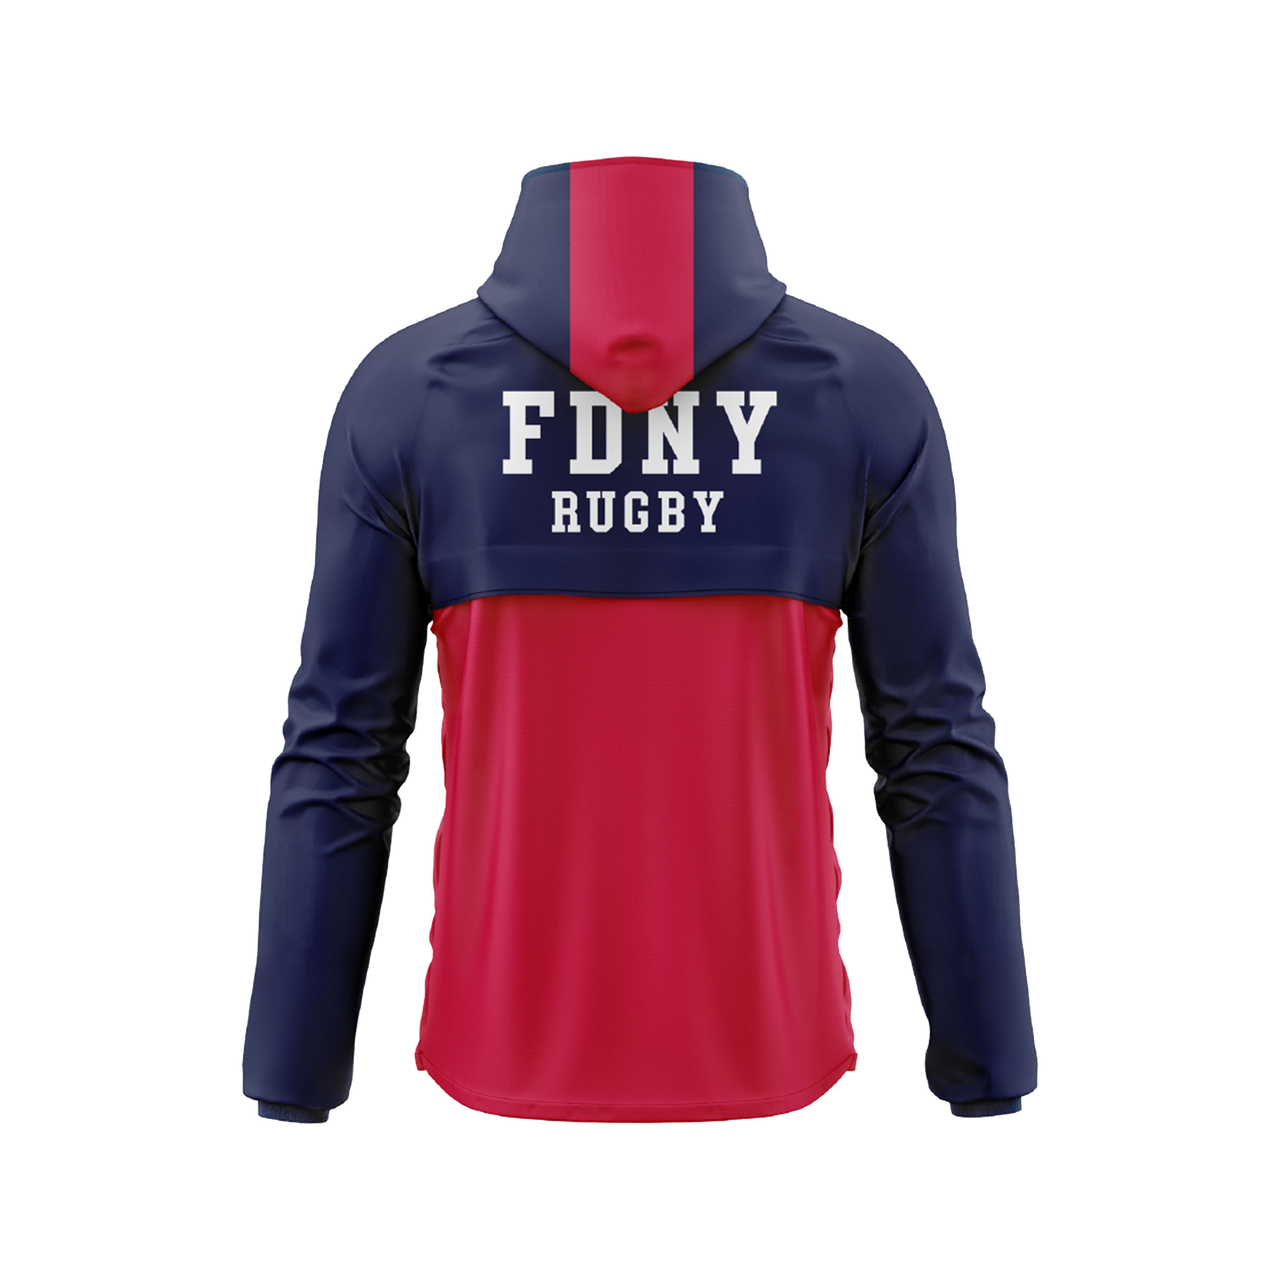 FDNY Rugby Warm Up Jacket